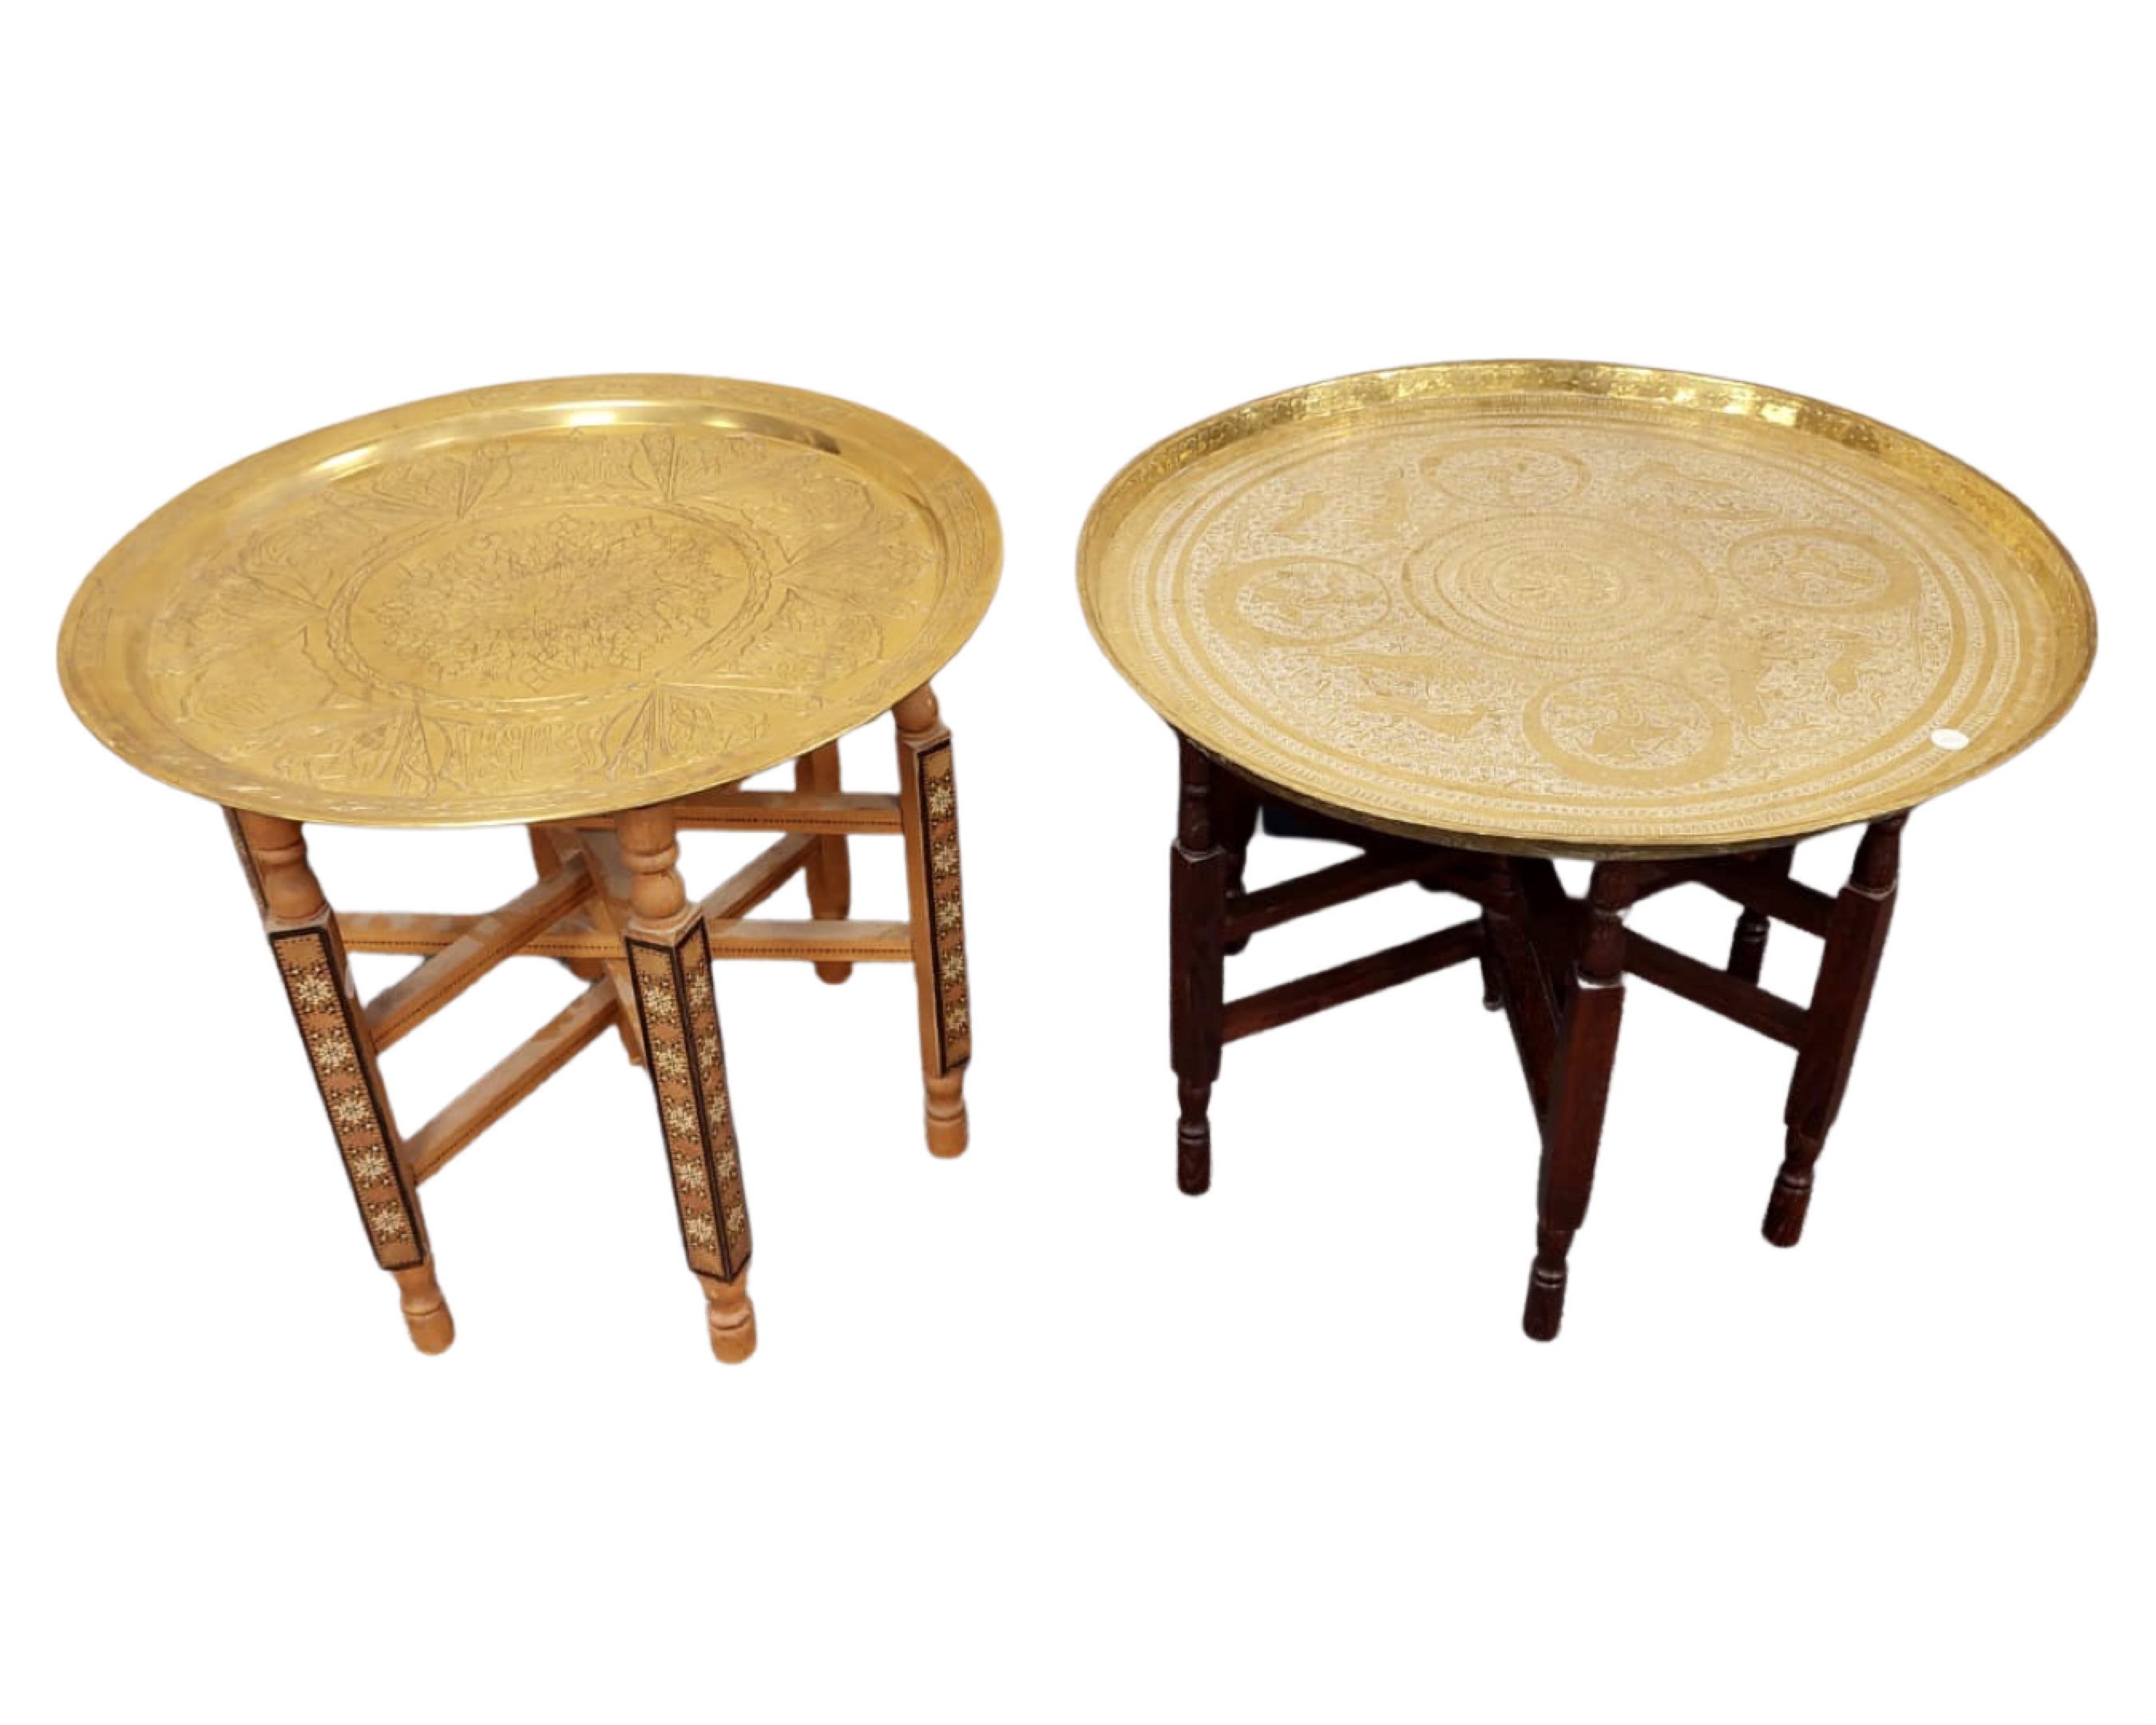 Two Islamic brass topped tables.